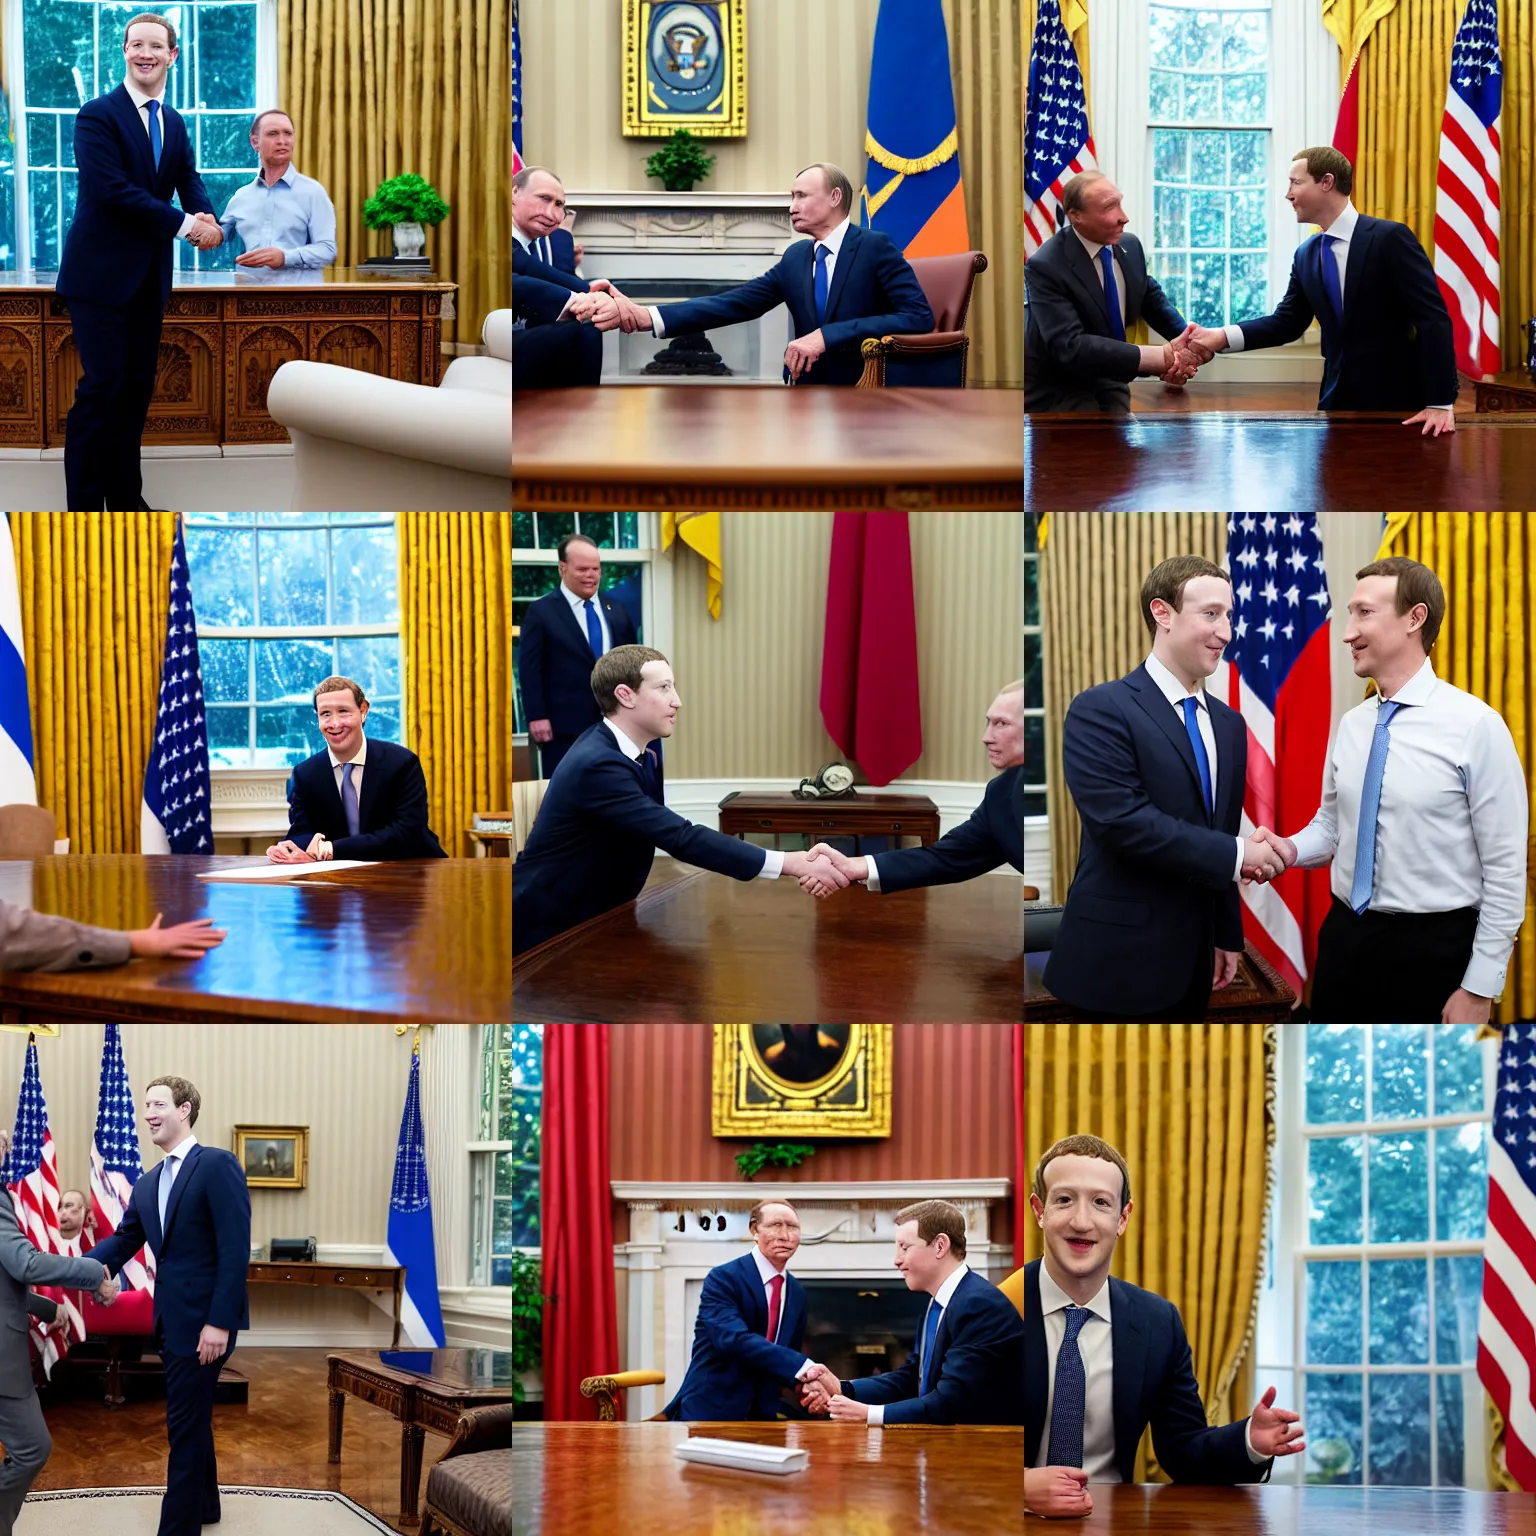 Prompt: headshot of Mark Zuckerberg the president of the united states shaking hands with Vladmir putin in the oval office, EOS-1D, f/1.4, ISO 200, 1/160s, 8K, RAW, unedited, symmetrical balance, in-frame, Photoshop, Nvidia, Topaz AI